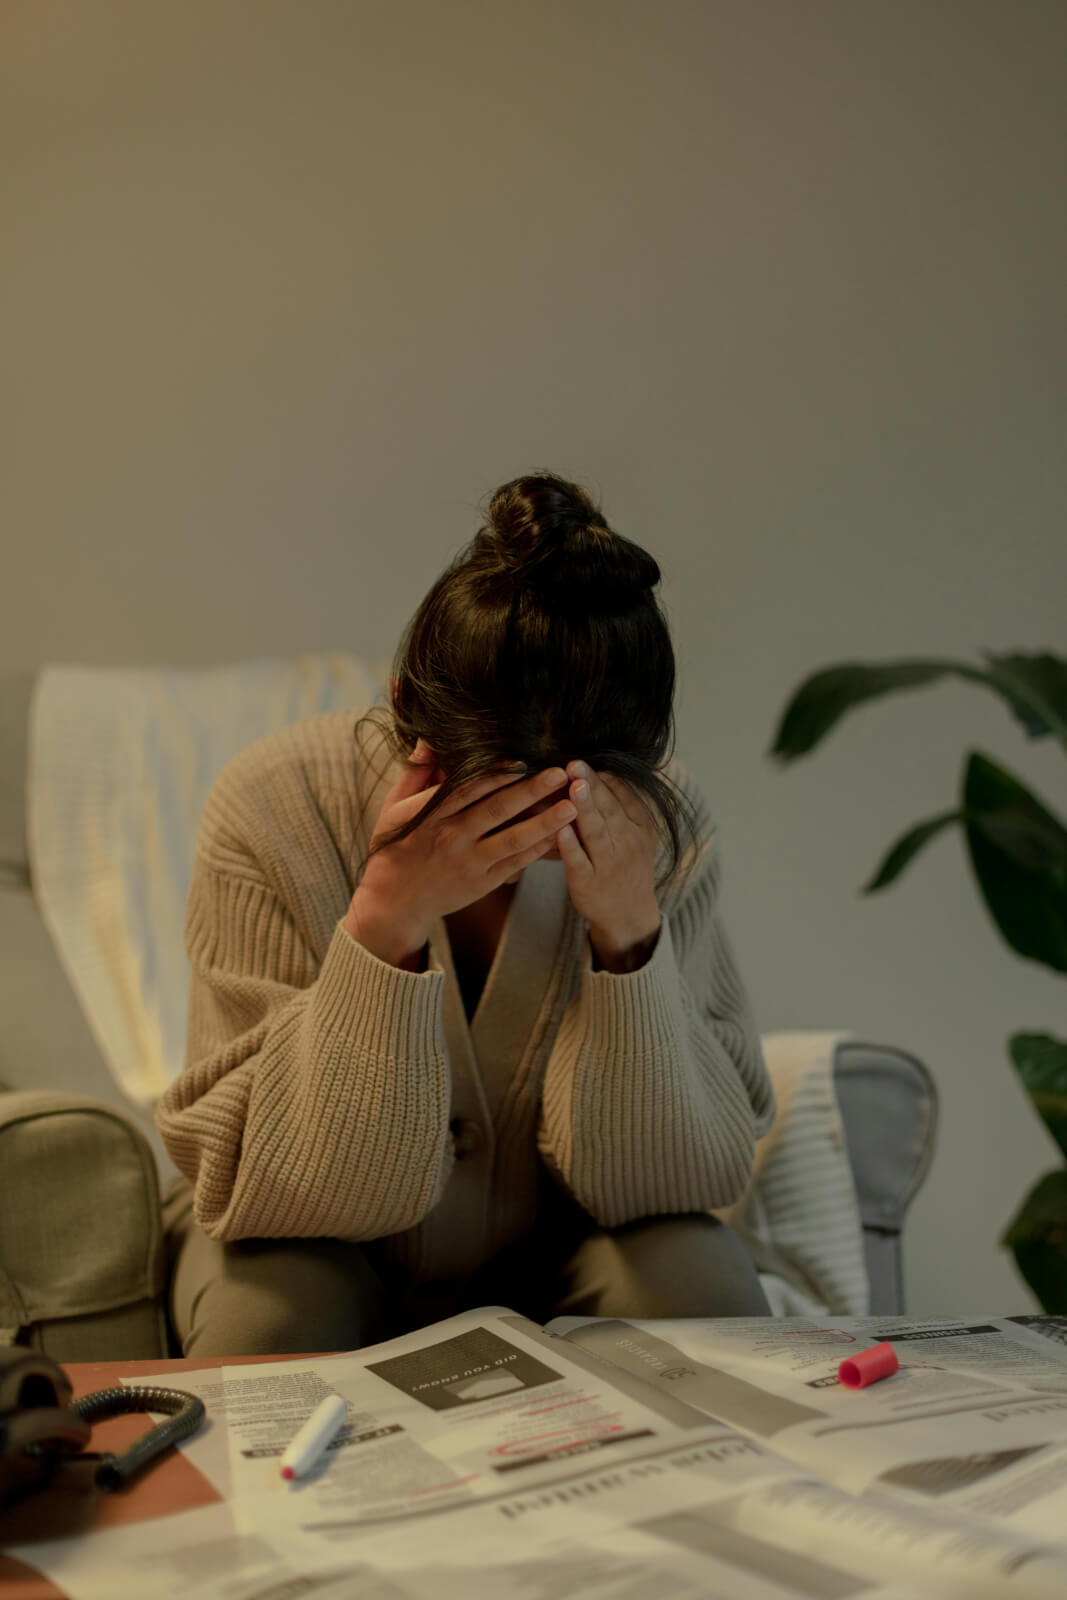 Unemployed And Depressed: How To Keep Tabs On Your Mental Health When You Lose Your Job